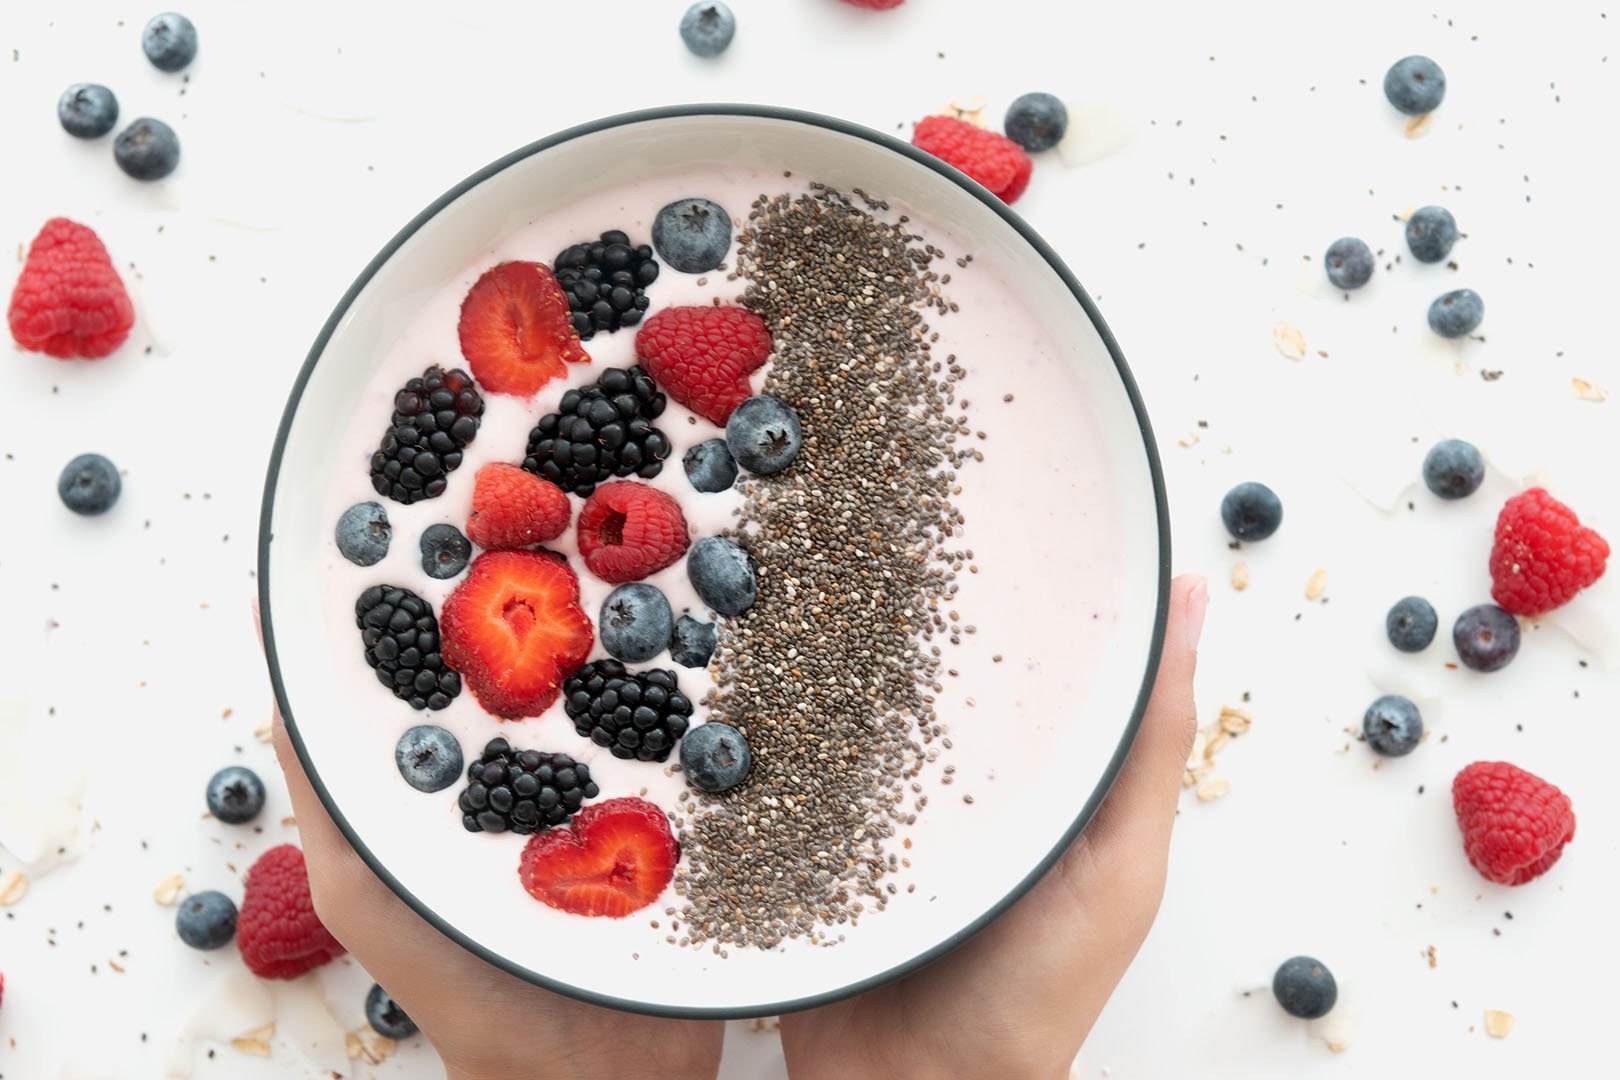 Hands holding a bowl of cashew yogurt with chia seeds and berries — a healthy breakfast